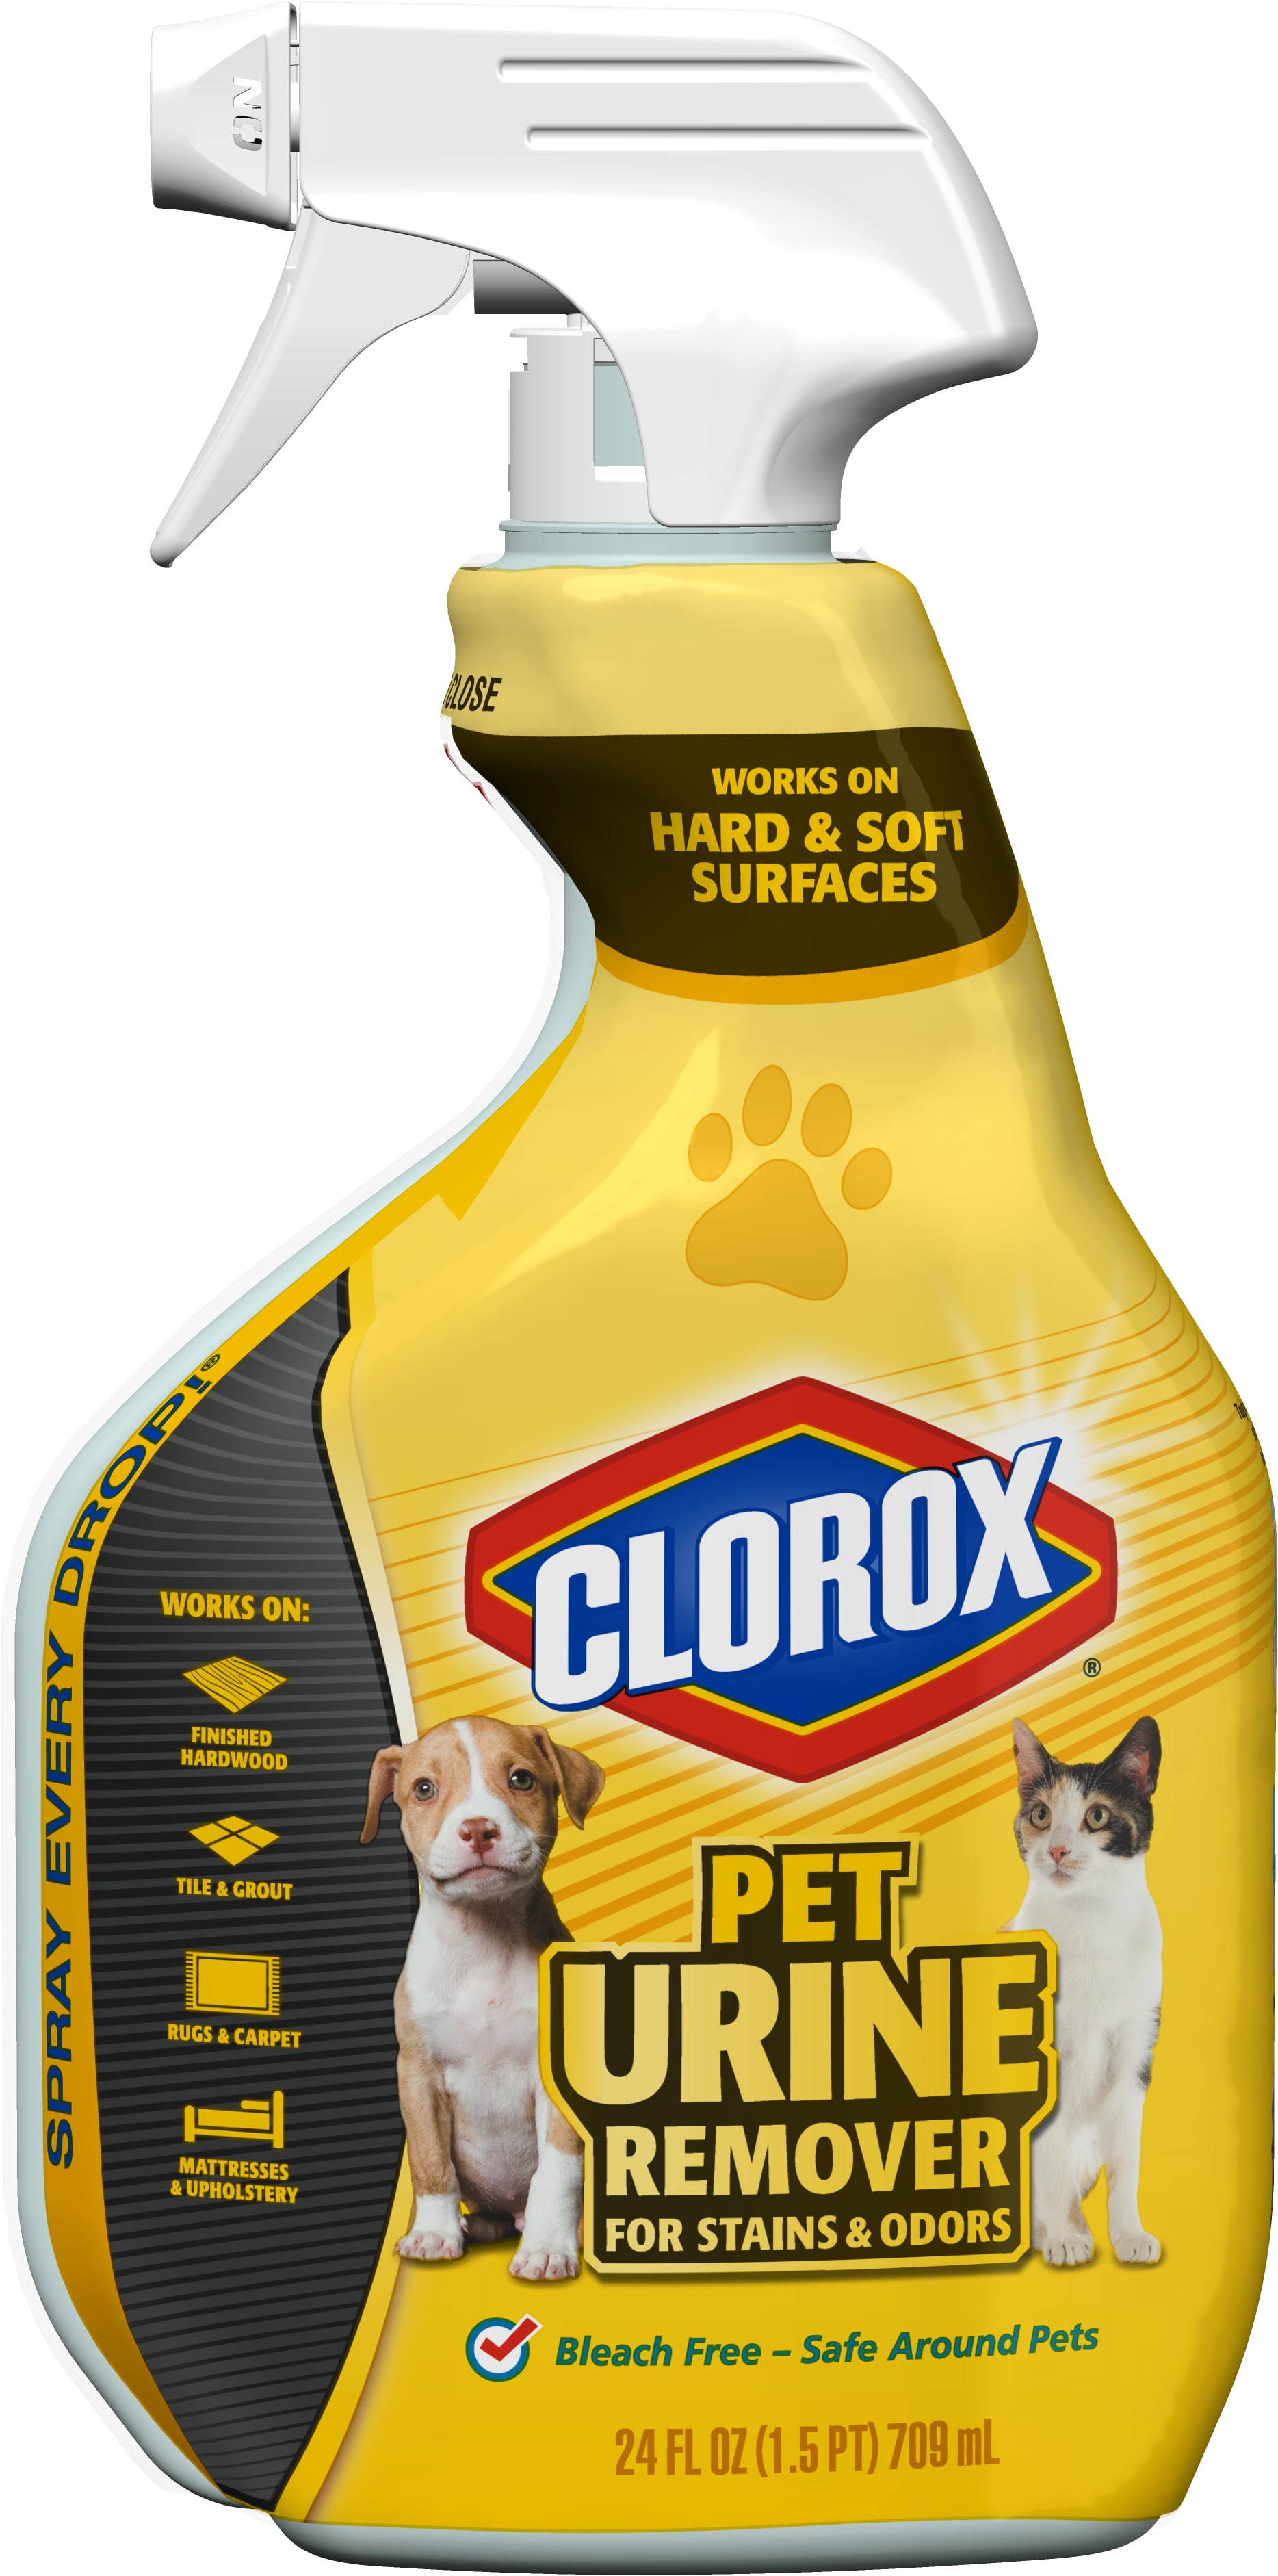 Clorox Pet Urine Remover for Stains and Odors, Spray ...